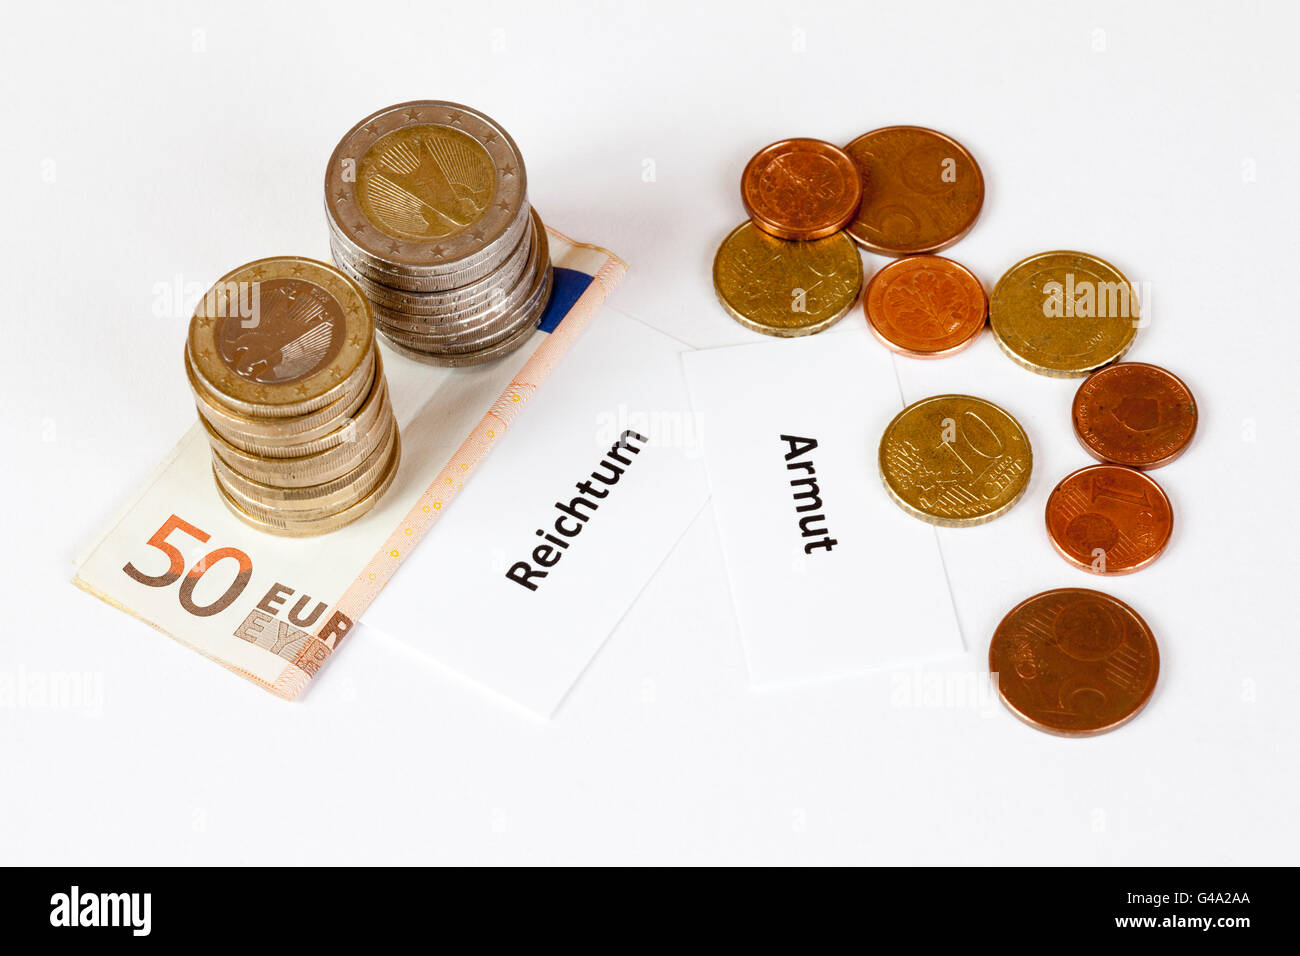 Signs "Reichtum" and "Armut", German for "wealth" and "poverty", stacked euro coins on euro banknotes Stock Photo